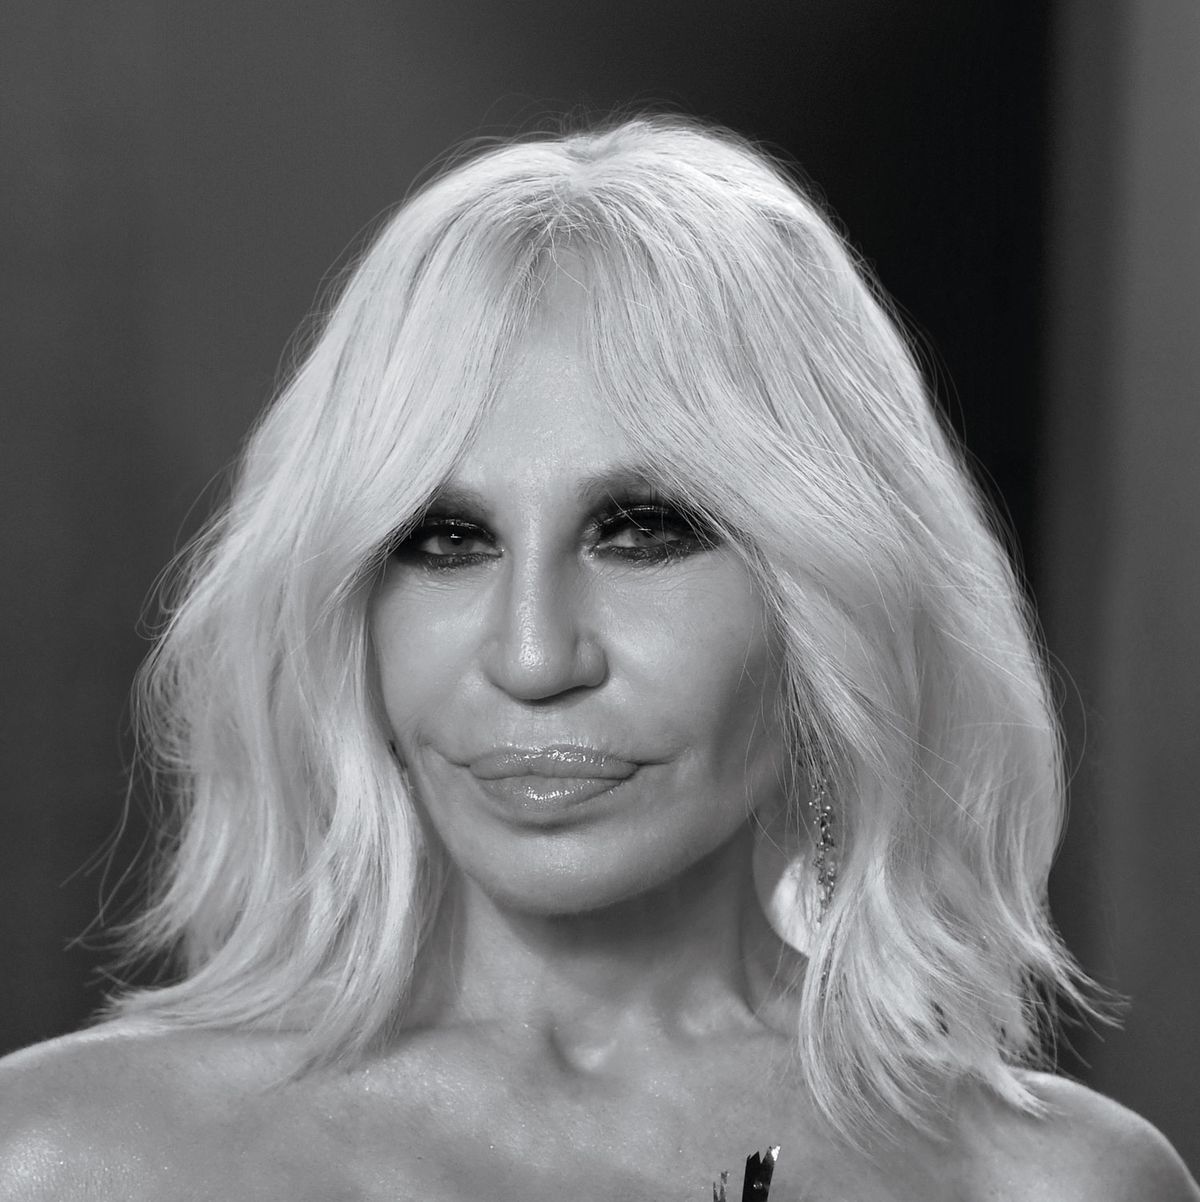 Donatella Versace to release a book on the luxury fashion house